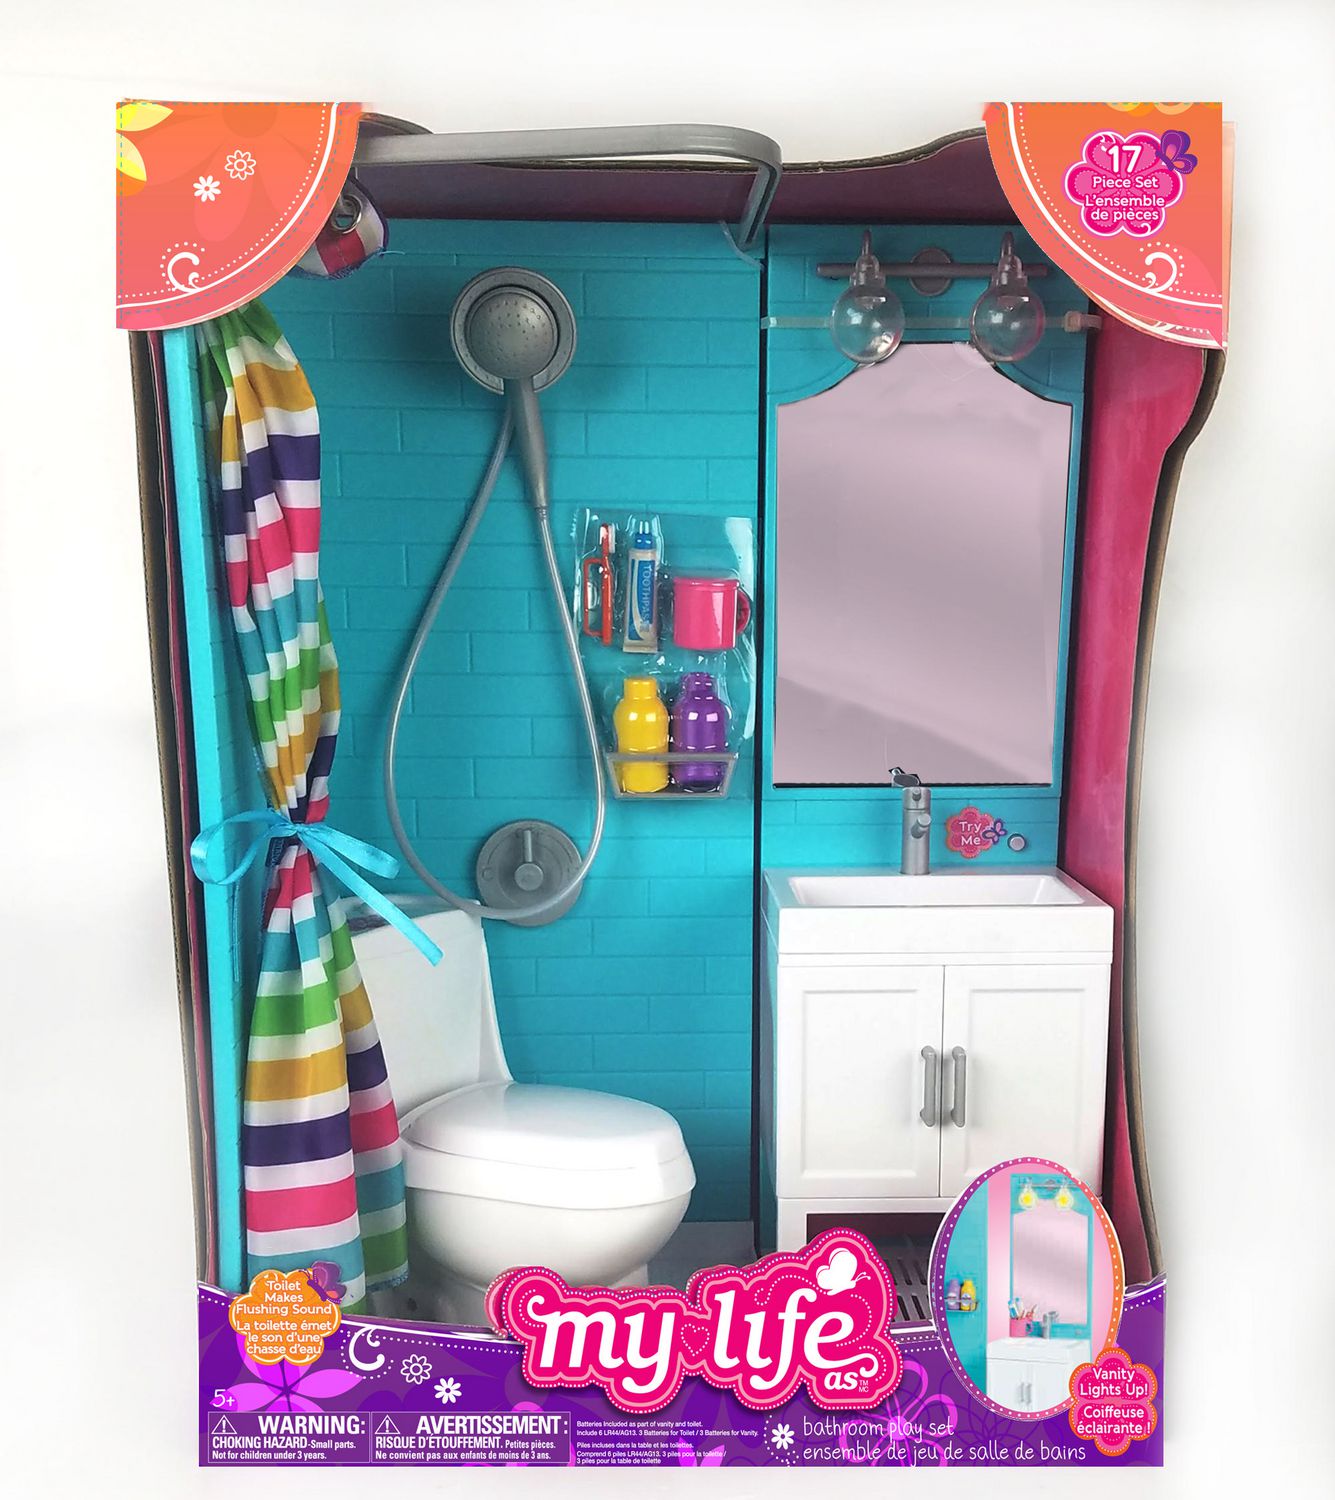 my life dolls and accessories